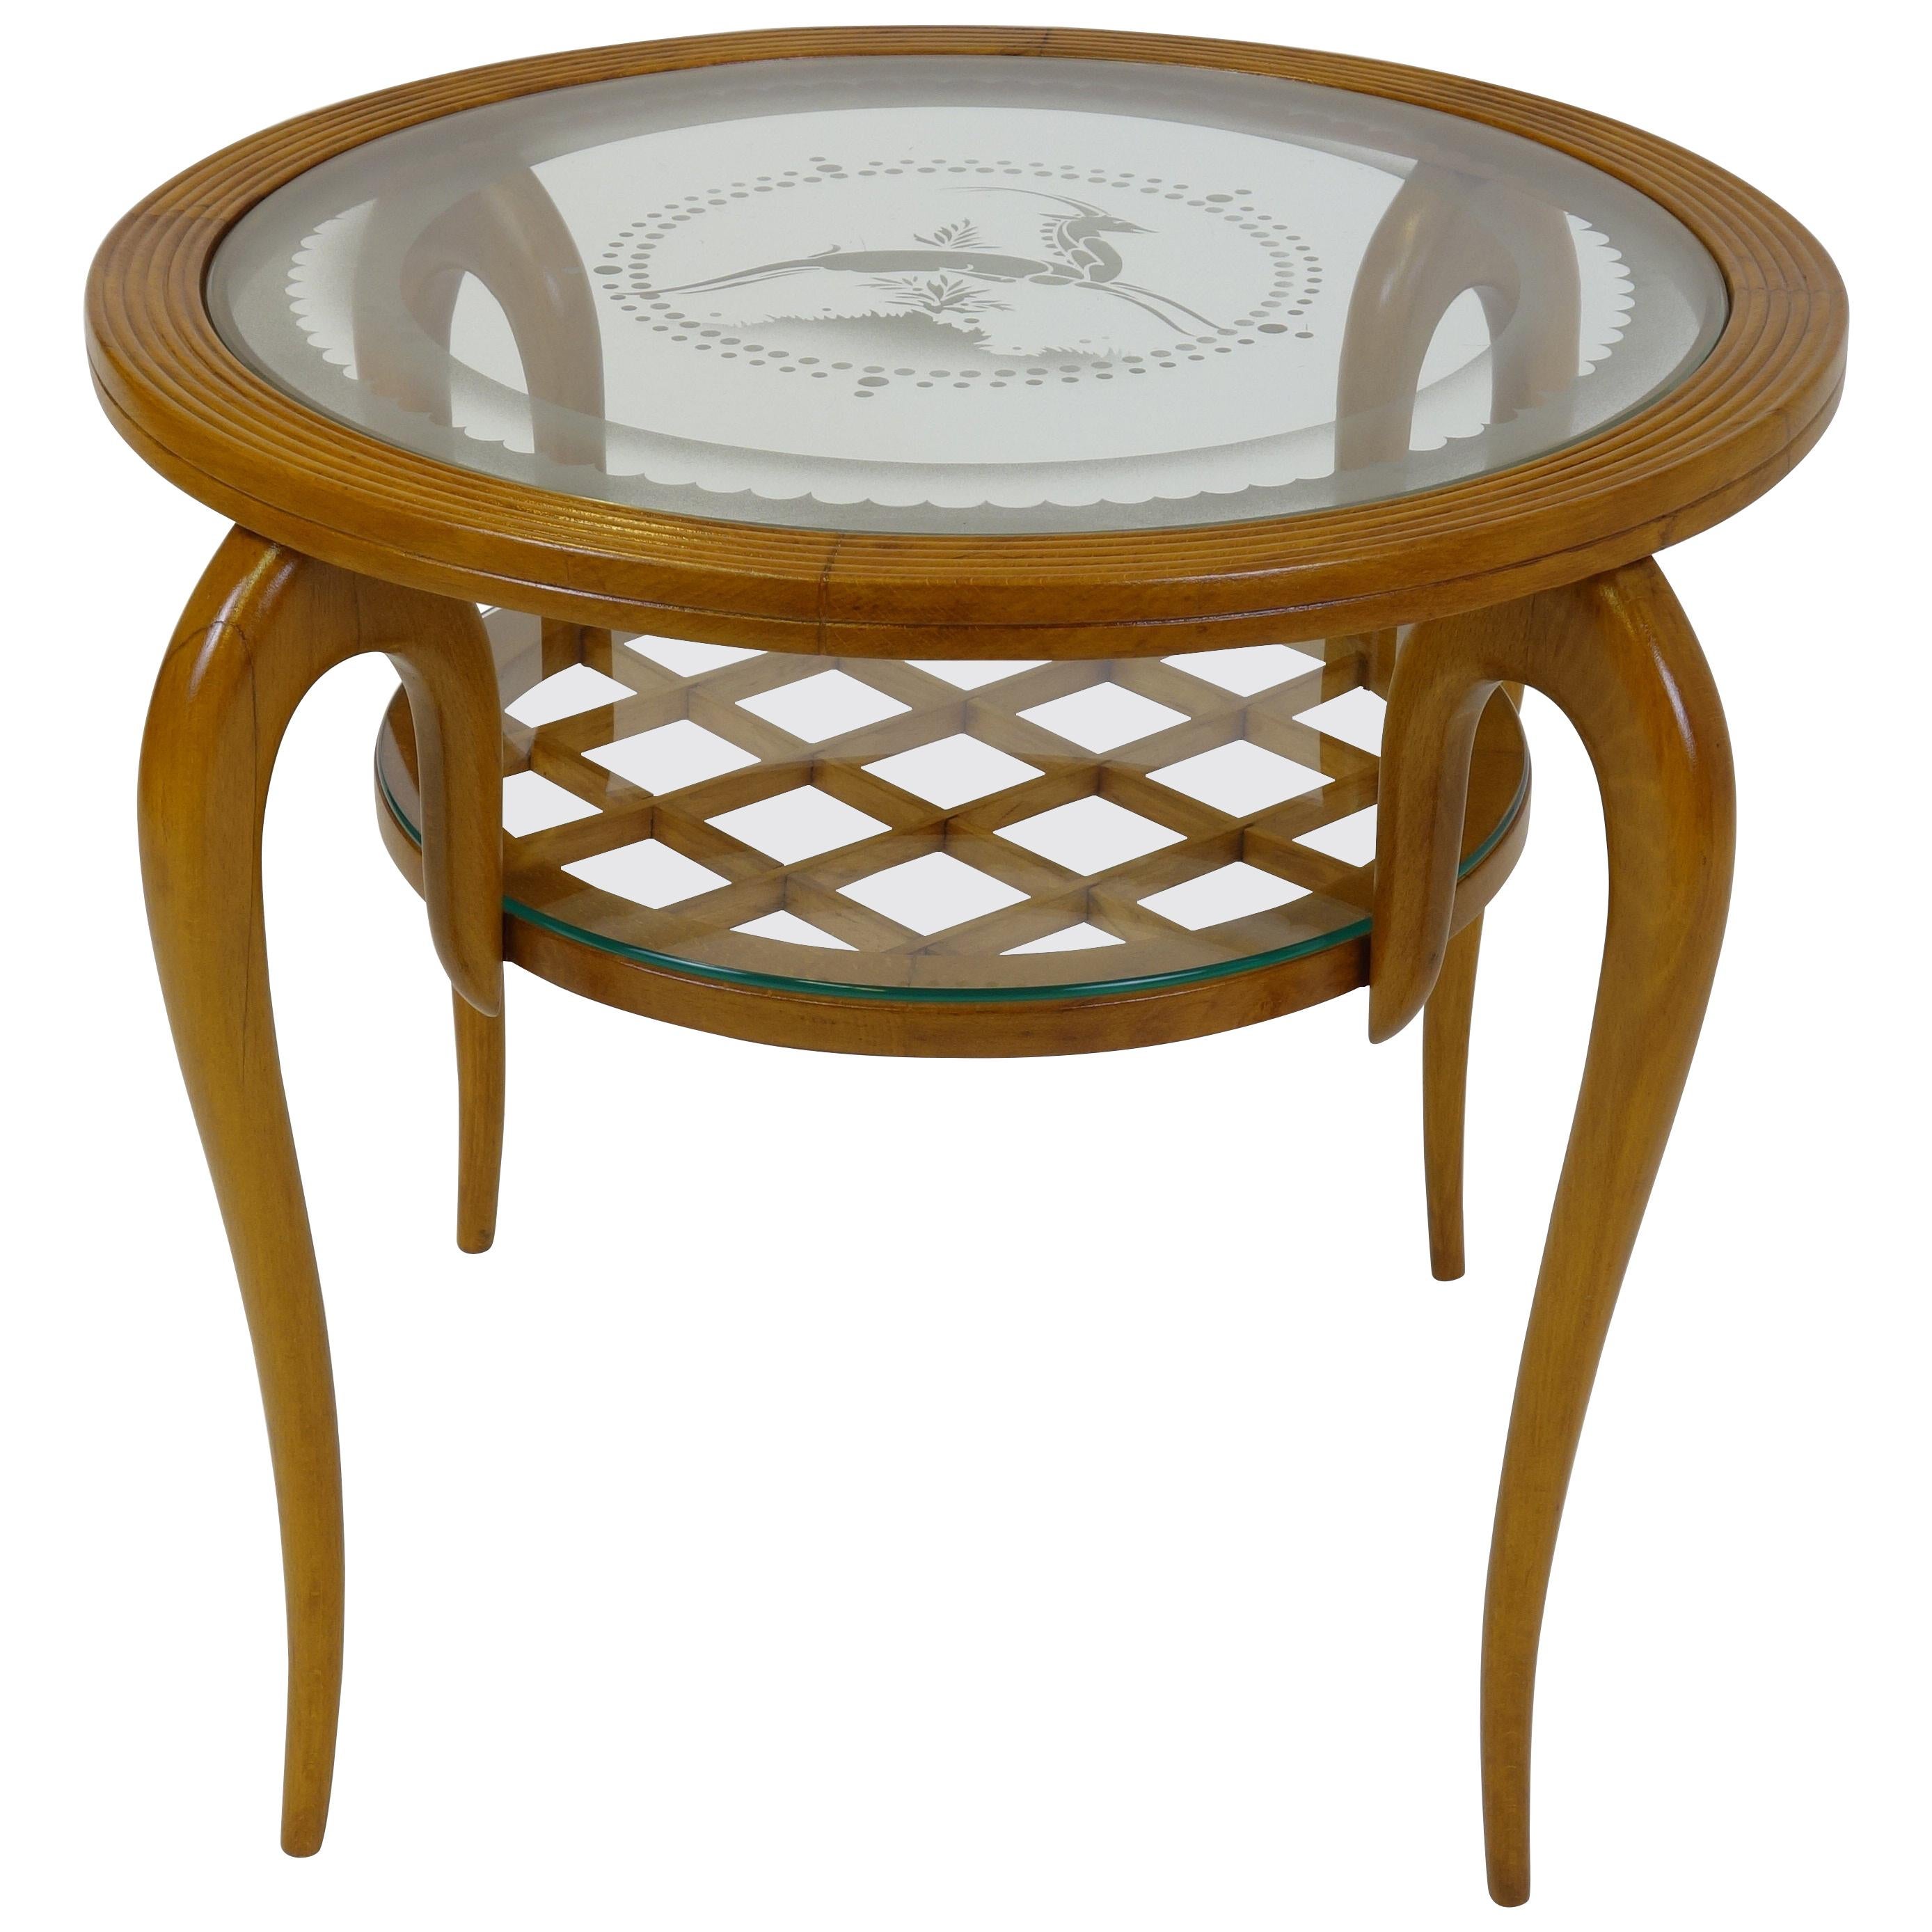 Sidetable in the Manner of Gio Ponti Carved Wood Etched Glass Motive Italy 1940s For Sale